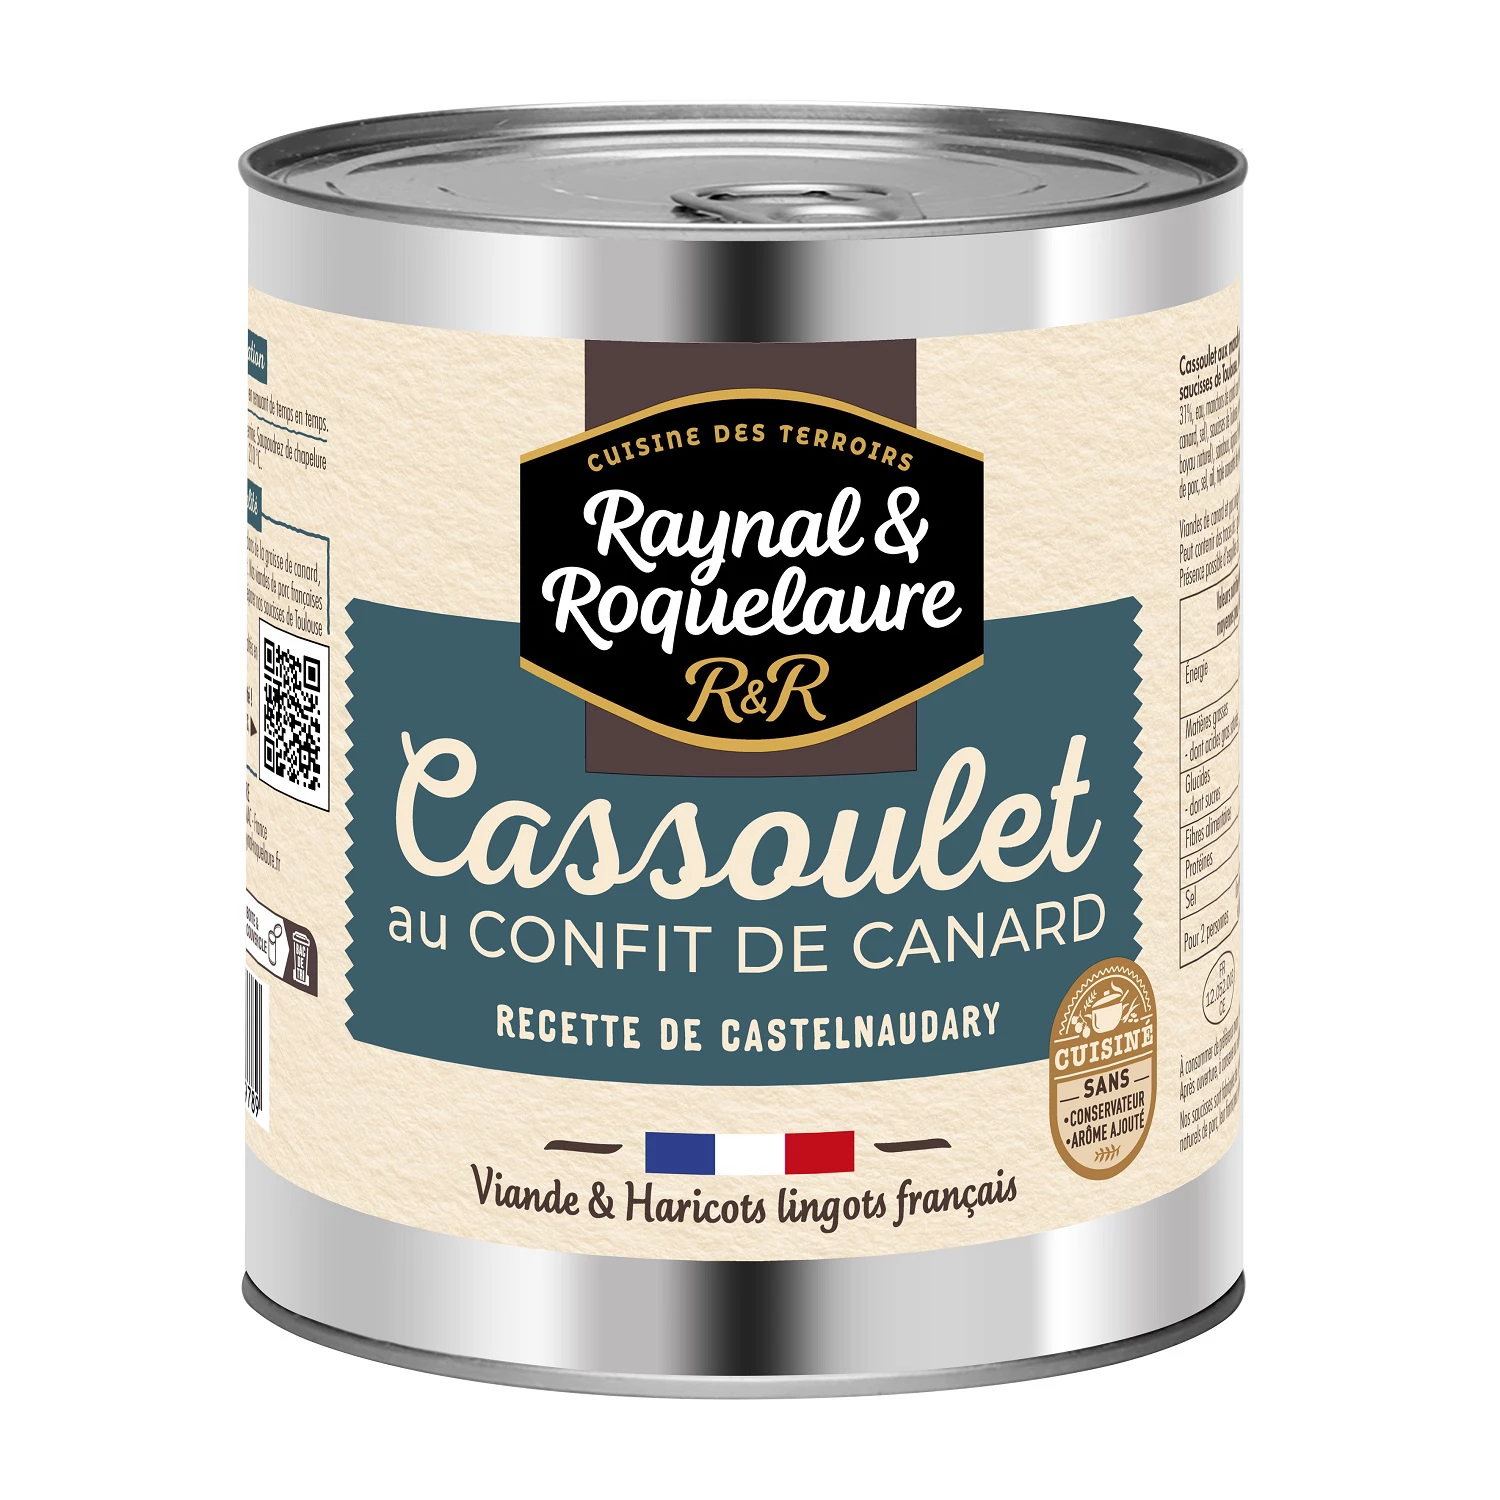 Castelnaudary cassoulet cooked dish with duck confit 840g - RAYNAL ET ROQUELAURE